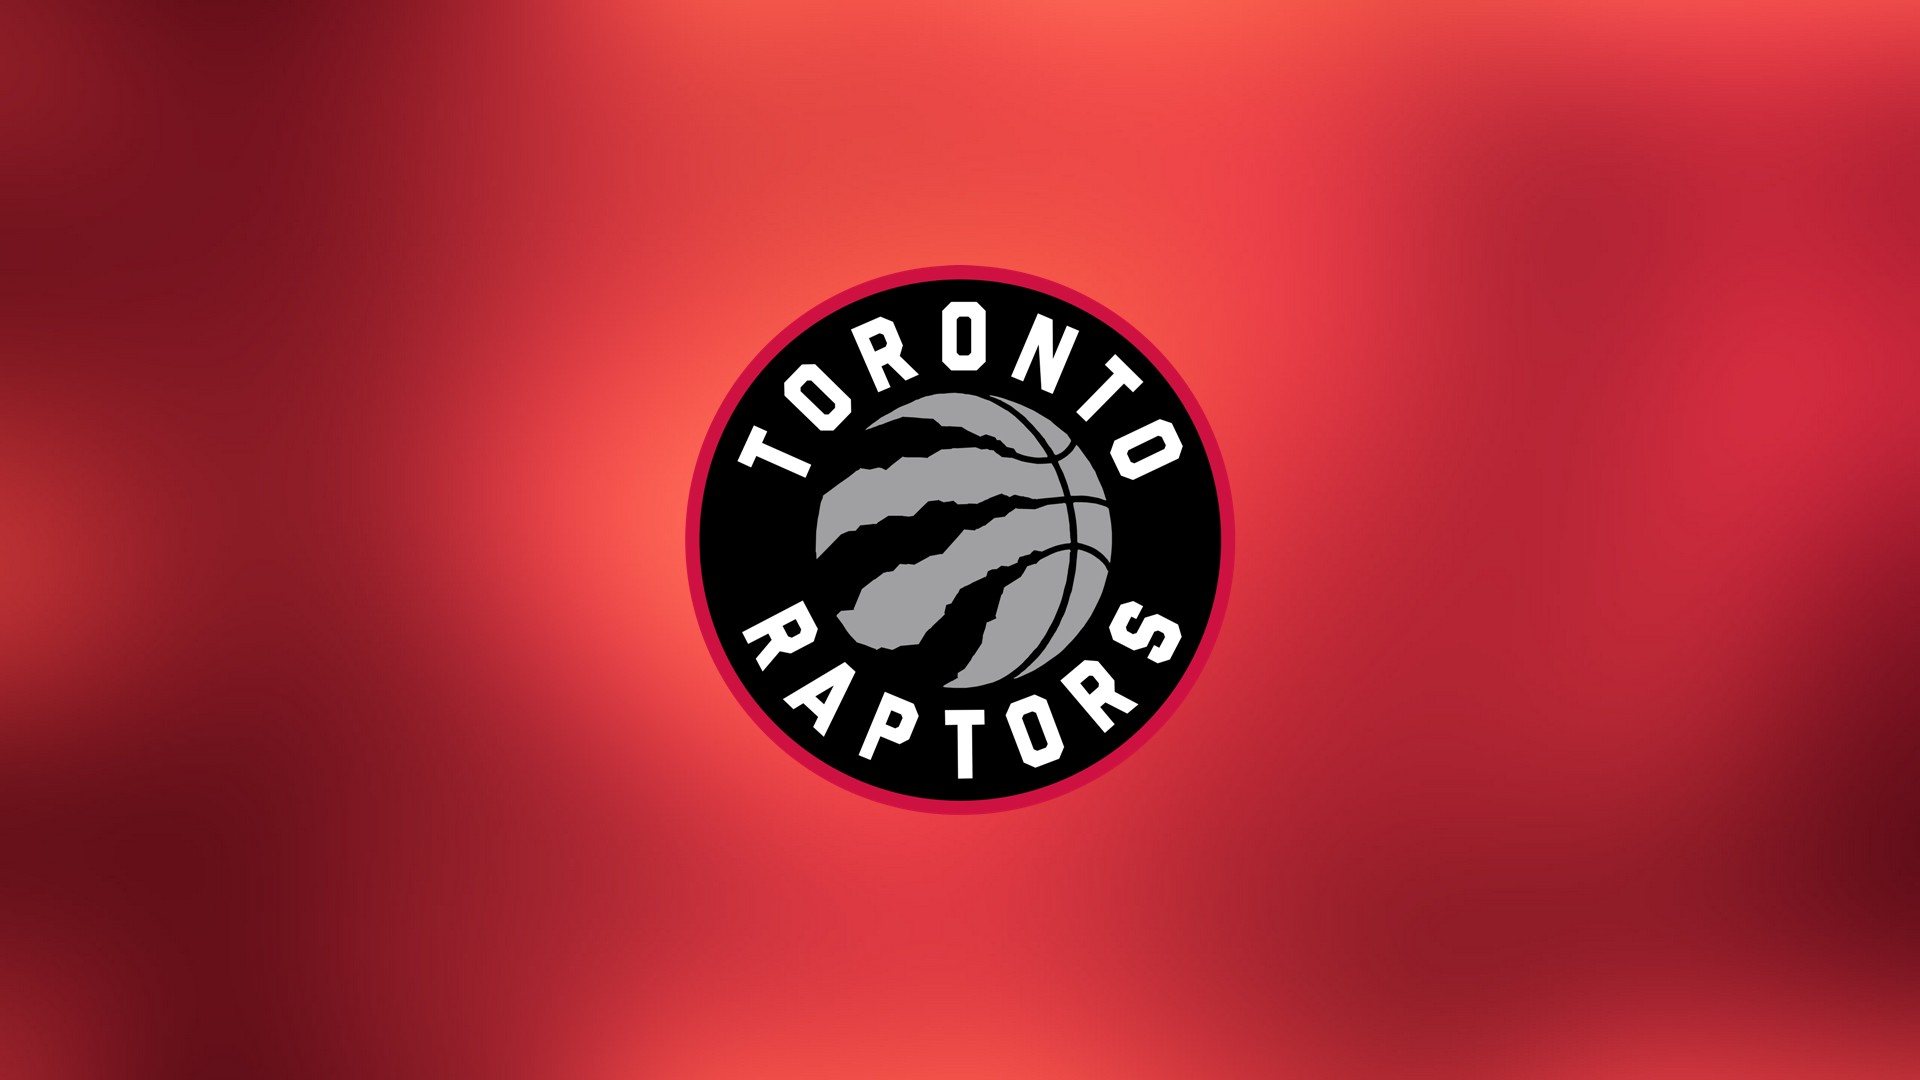 Wallpaper Desktop Basketball Toronto HD with image dimensions 1920X1080 pixel. You can make this wallpaper for your Desktop Computer Backgrounds, Windows or Mac Screensavers, iPhone Lock screen, Tablet or Android and another Mobile Phone device